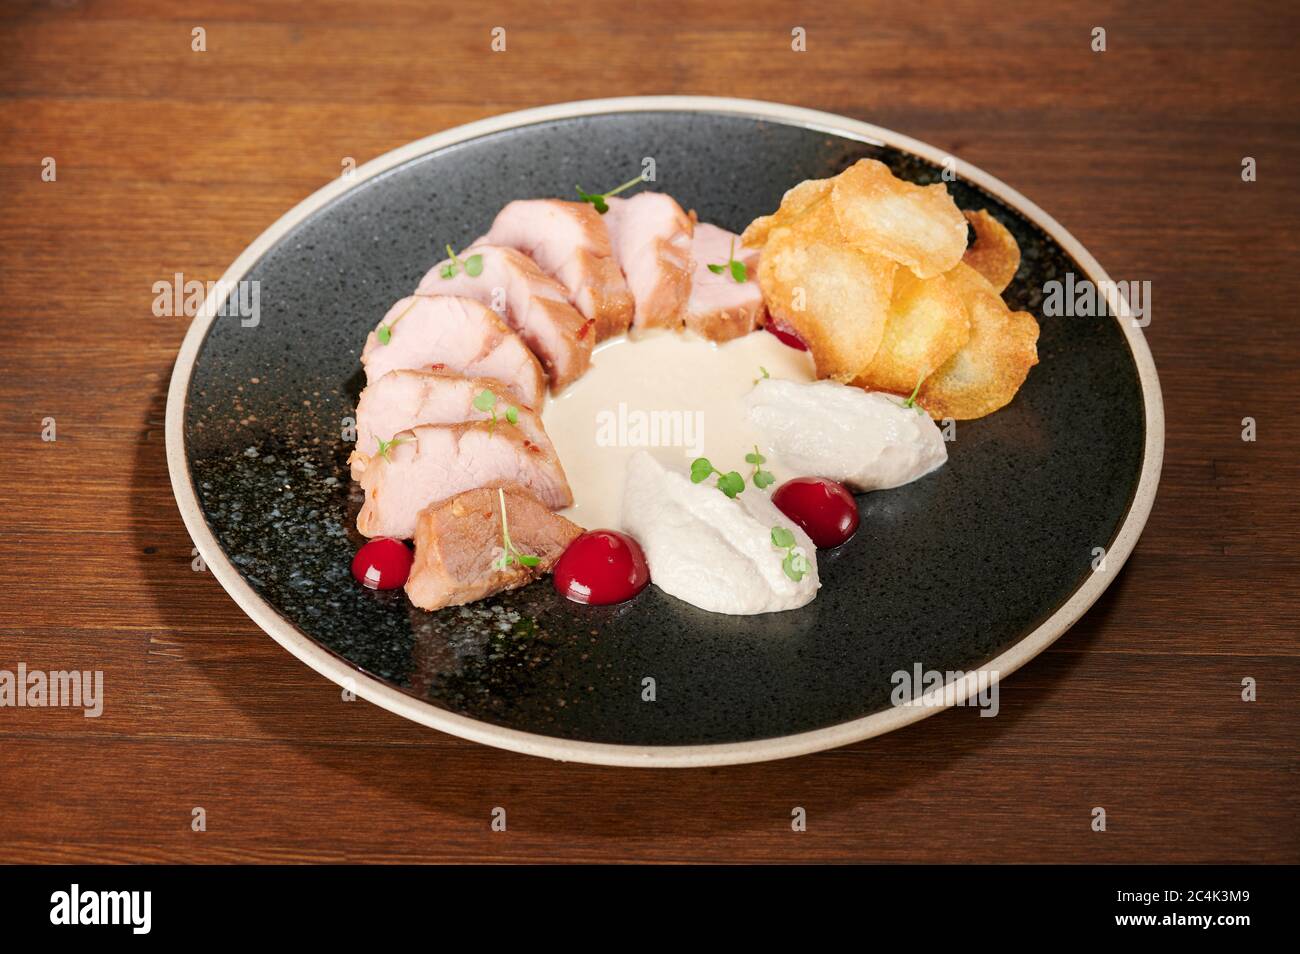 Fresh sliced pork meal on black plate close up view Stock Photo